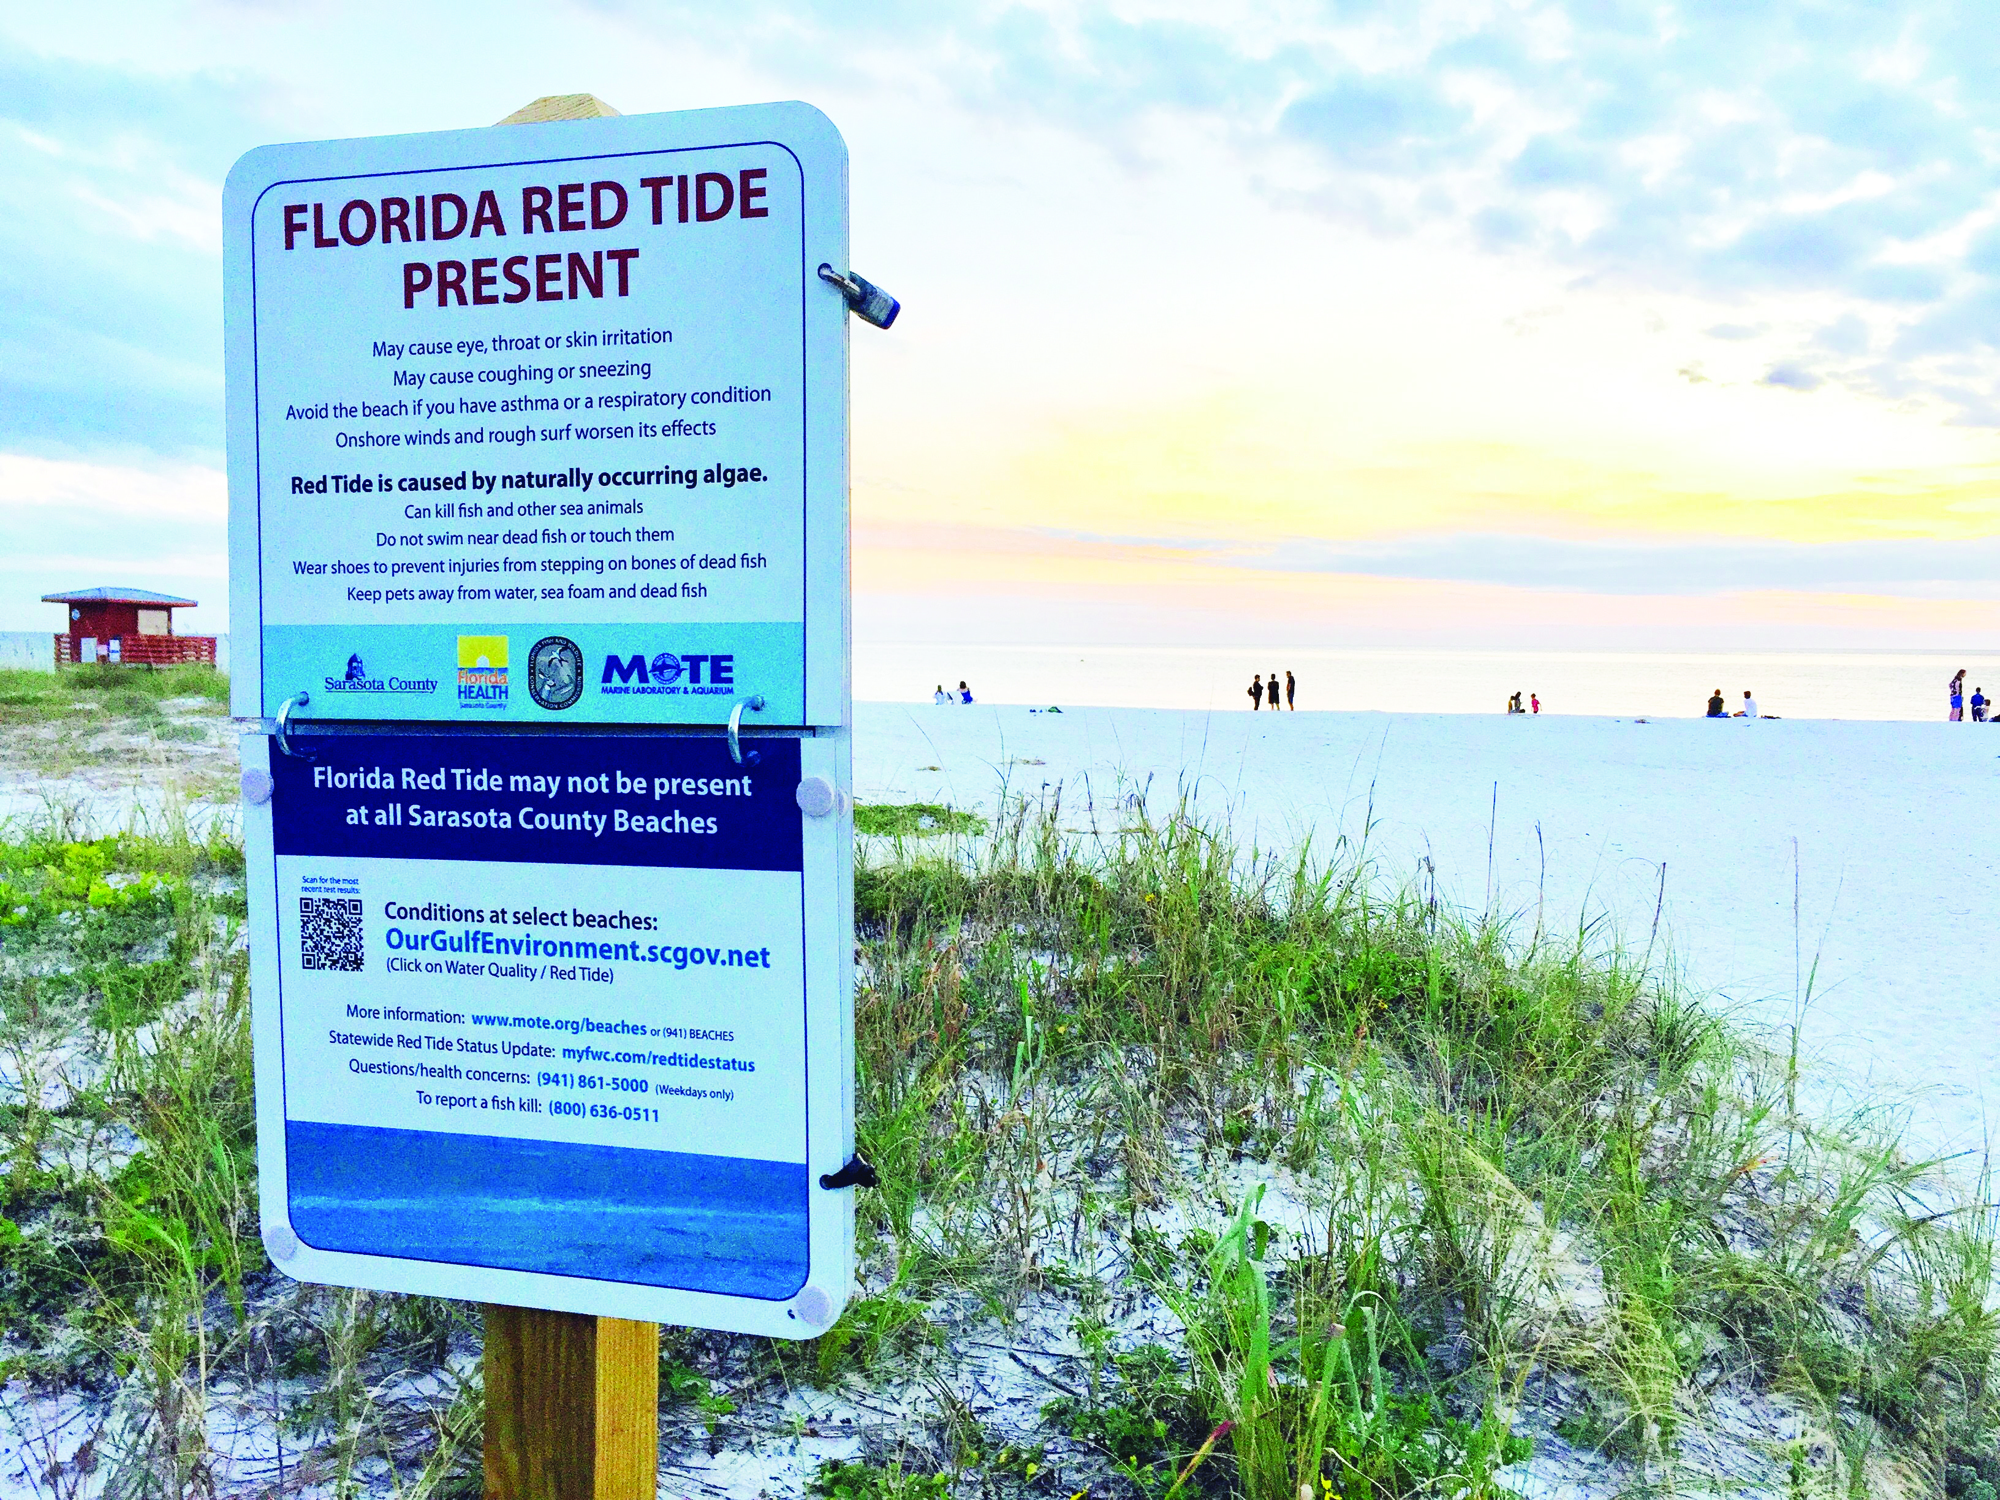 In the second installment of a two-part series, The Observer examines how the community is navigating the challenges associated with red tide in pursuit of meaningful solutions to a complex issue.